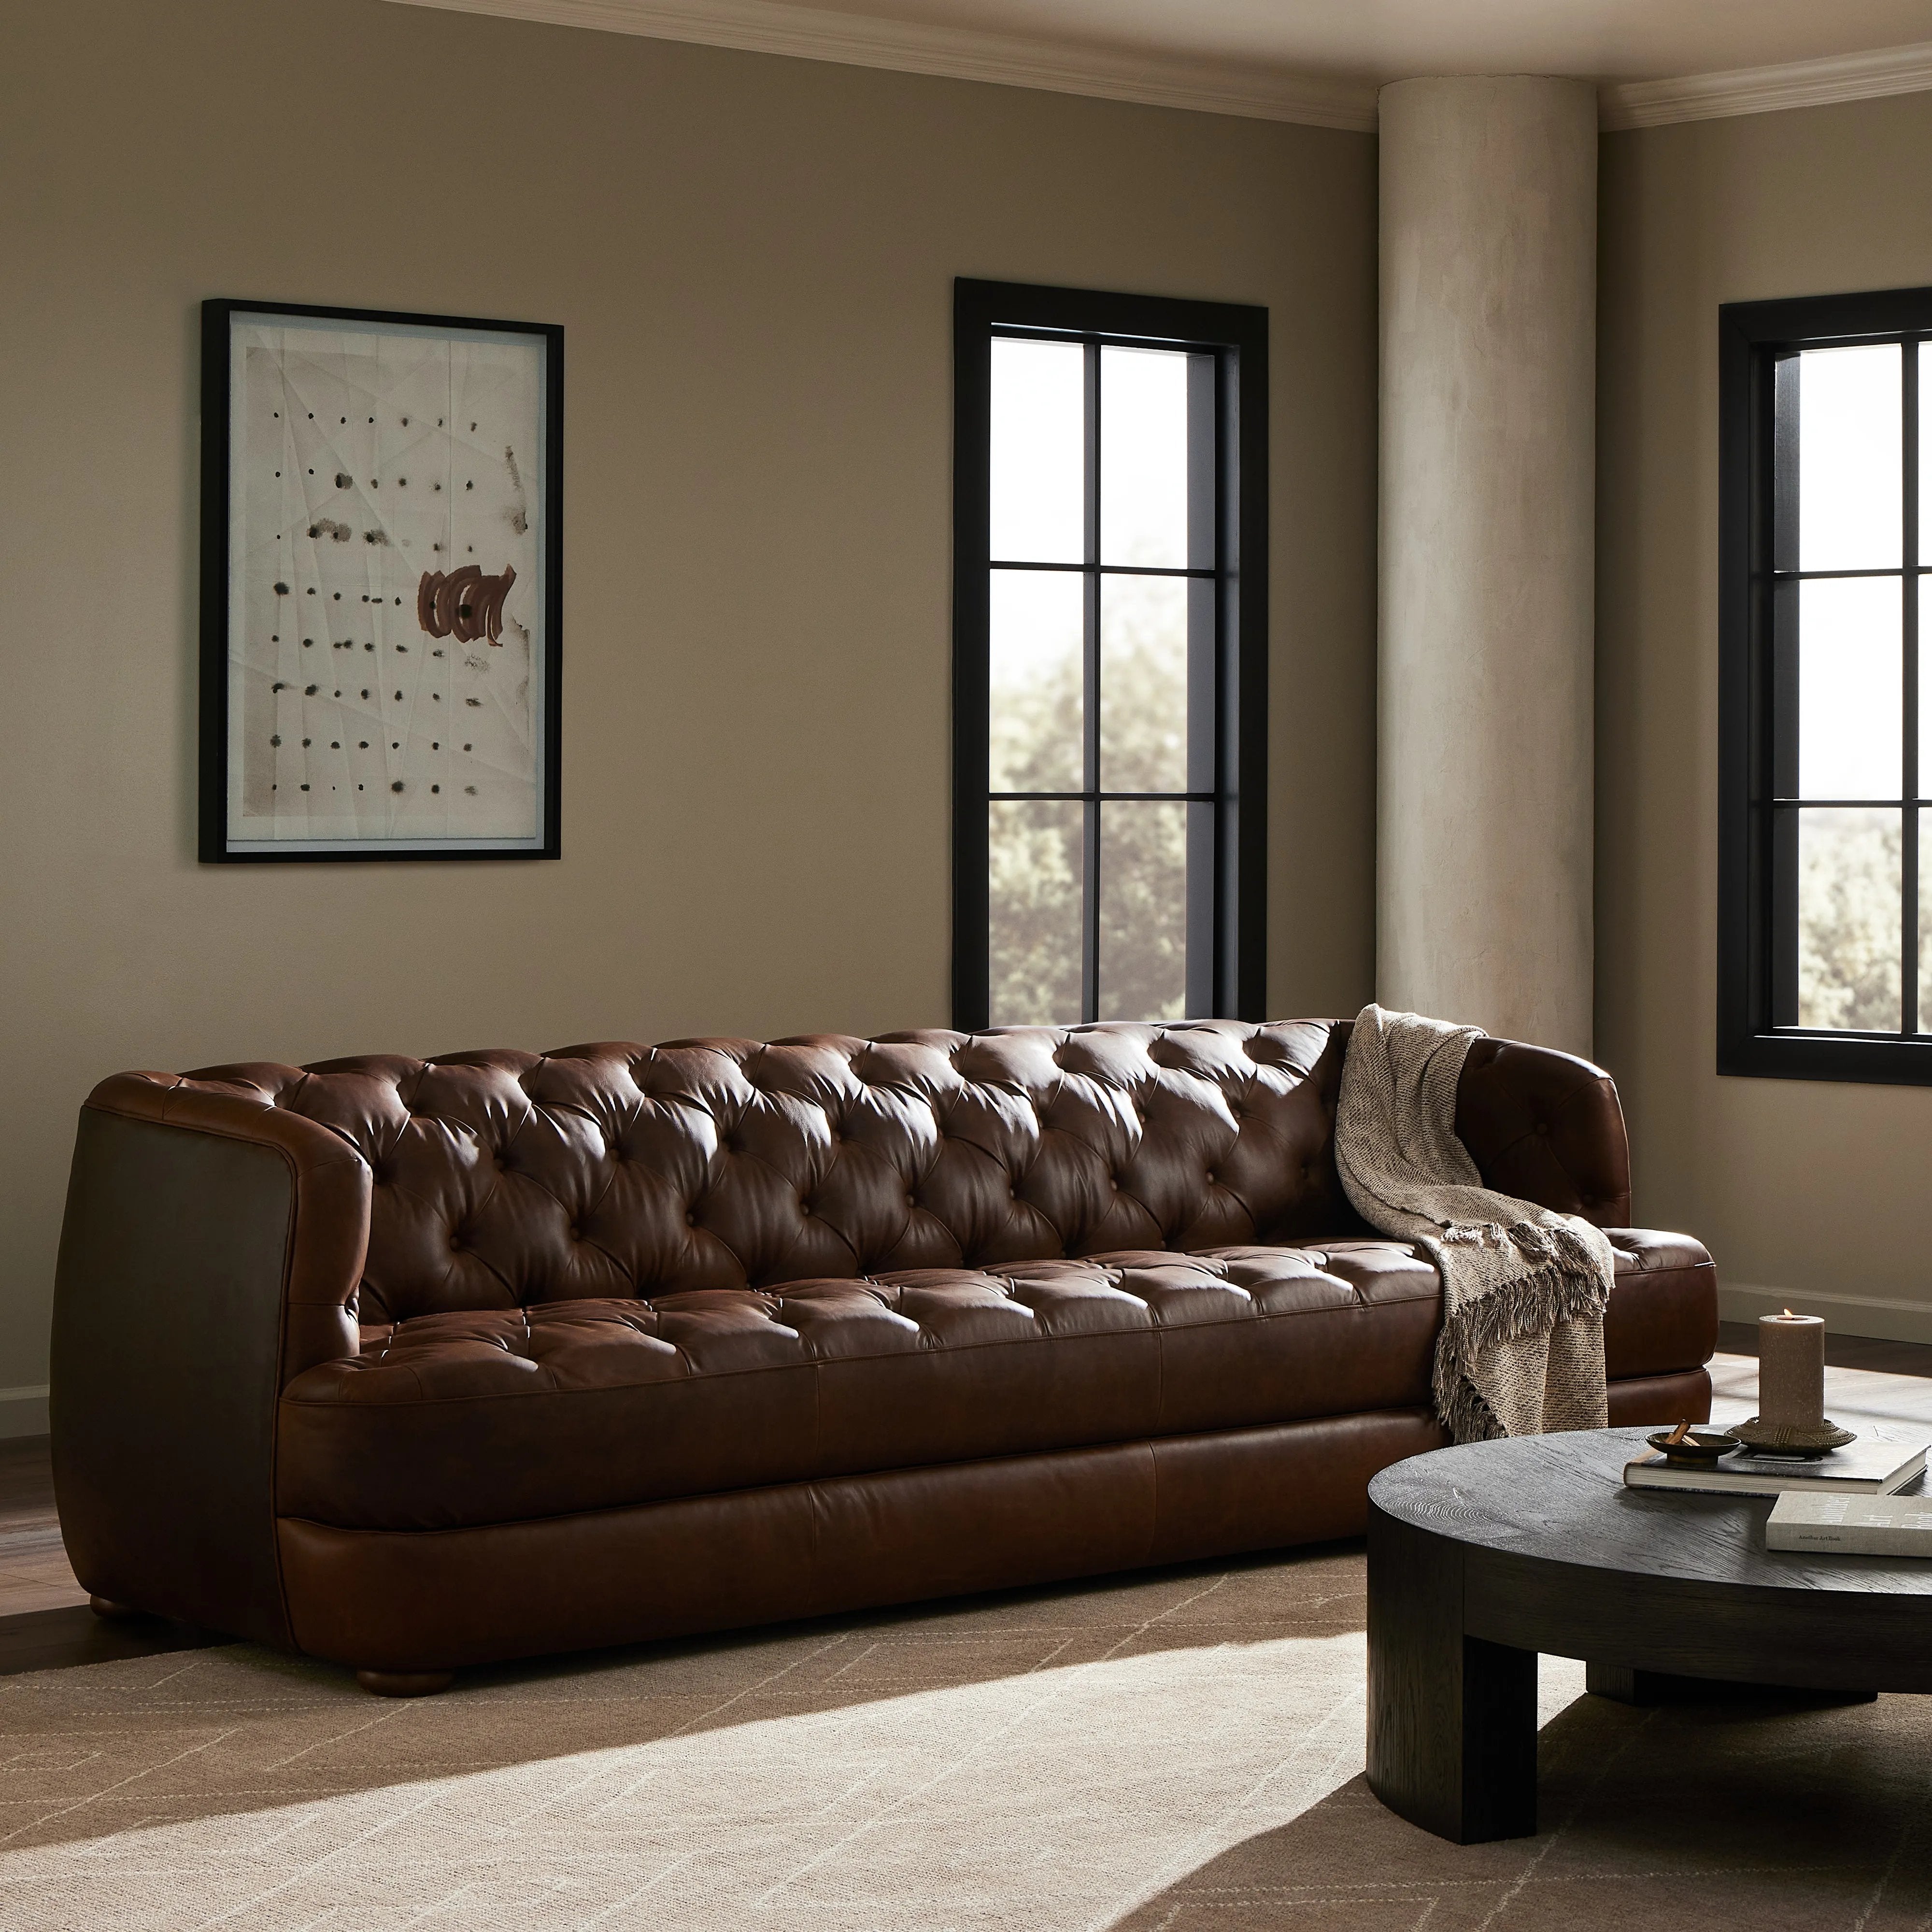 An Old English-inspired design is updated with button tufting across the back and arms. Upholstered in a top-grain leather finished with a soft hand for a vintage, lived-in look on this traditionally inspired sofa. Handcrafted in Italy, the richness of this distinctive, full-bodied leather develops an even-richer patina over time. Amethyst Home provides interior design, new home construction design consulting, vintage area rugs, and lighting in the Alpharetta metro area.